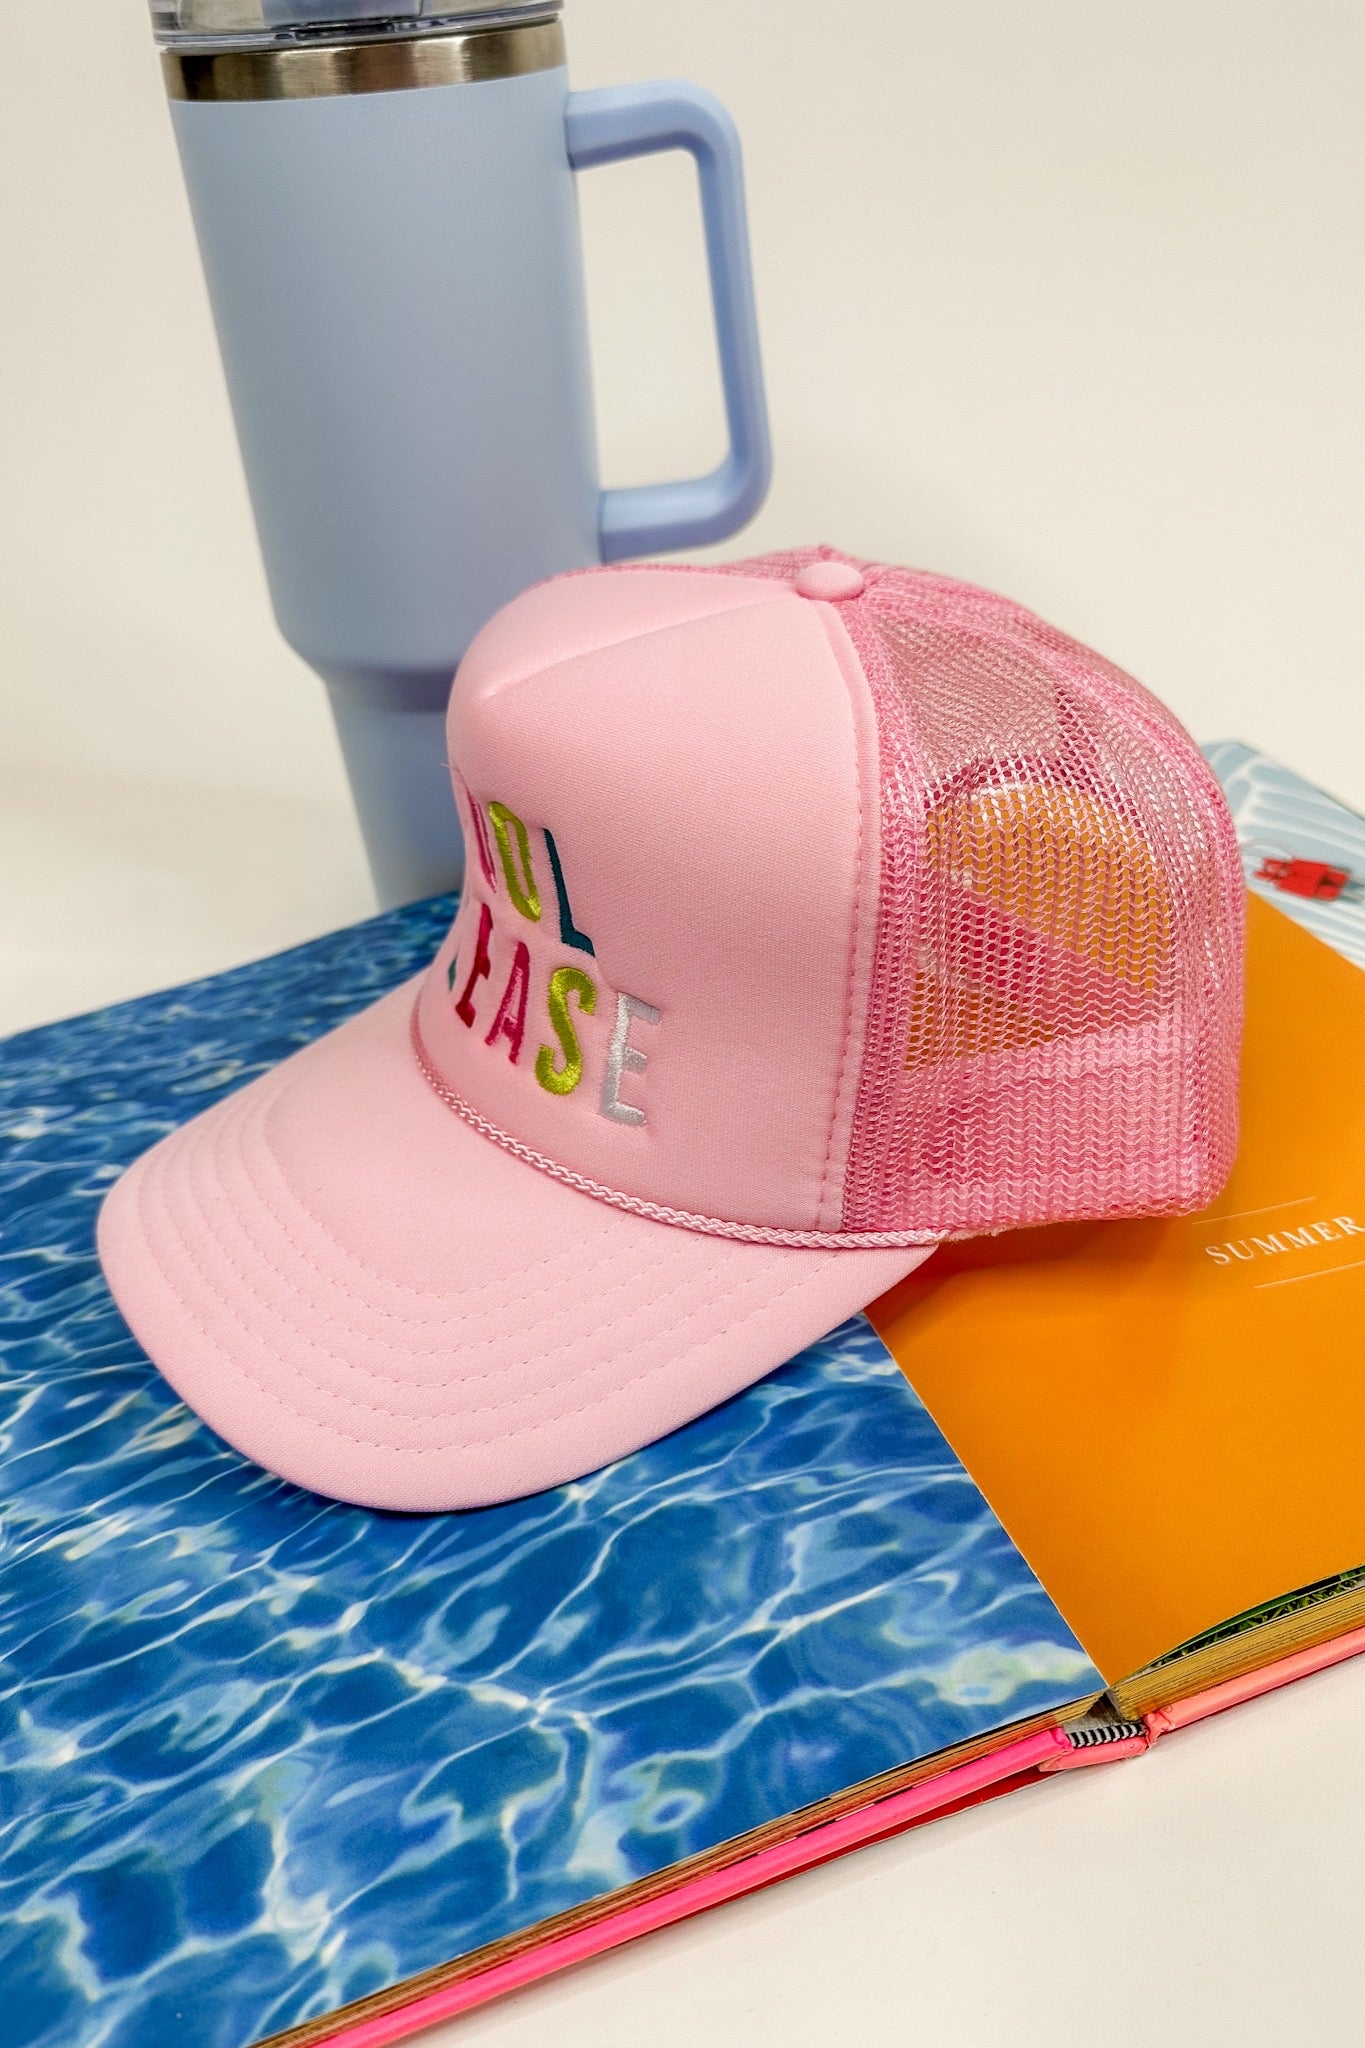 Pool Please Embroidered Pink Trucker Hat